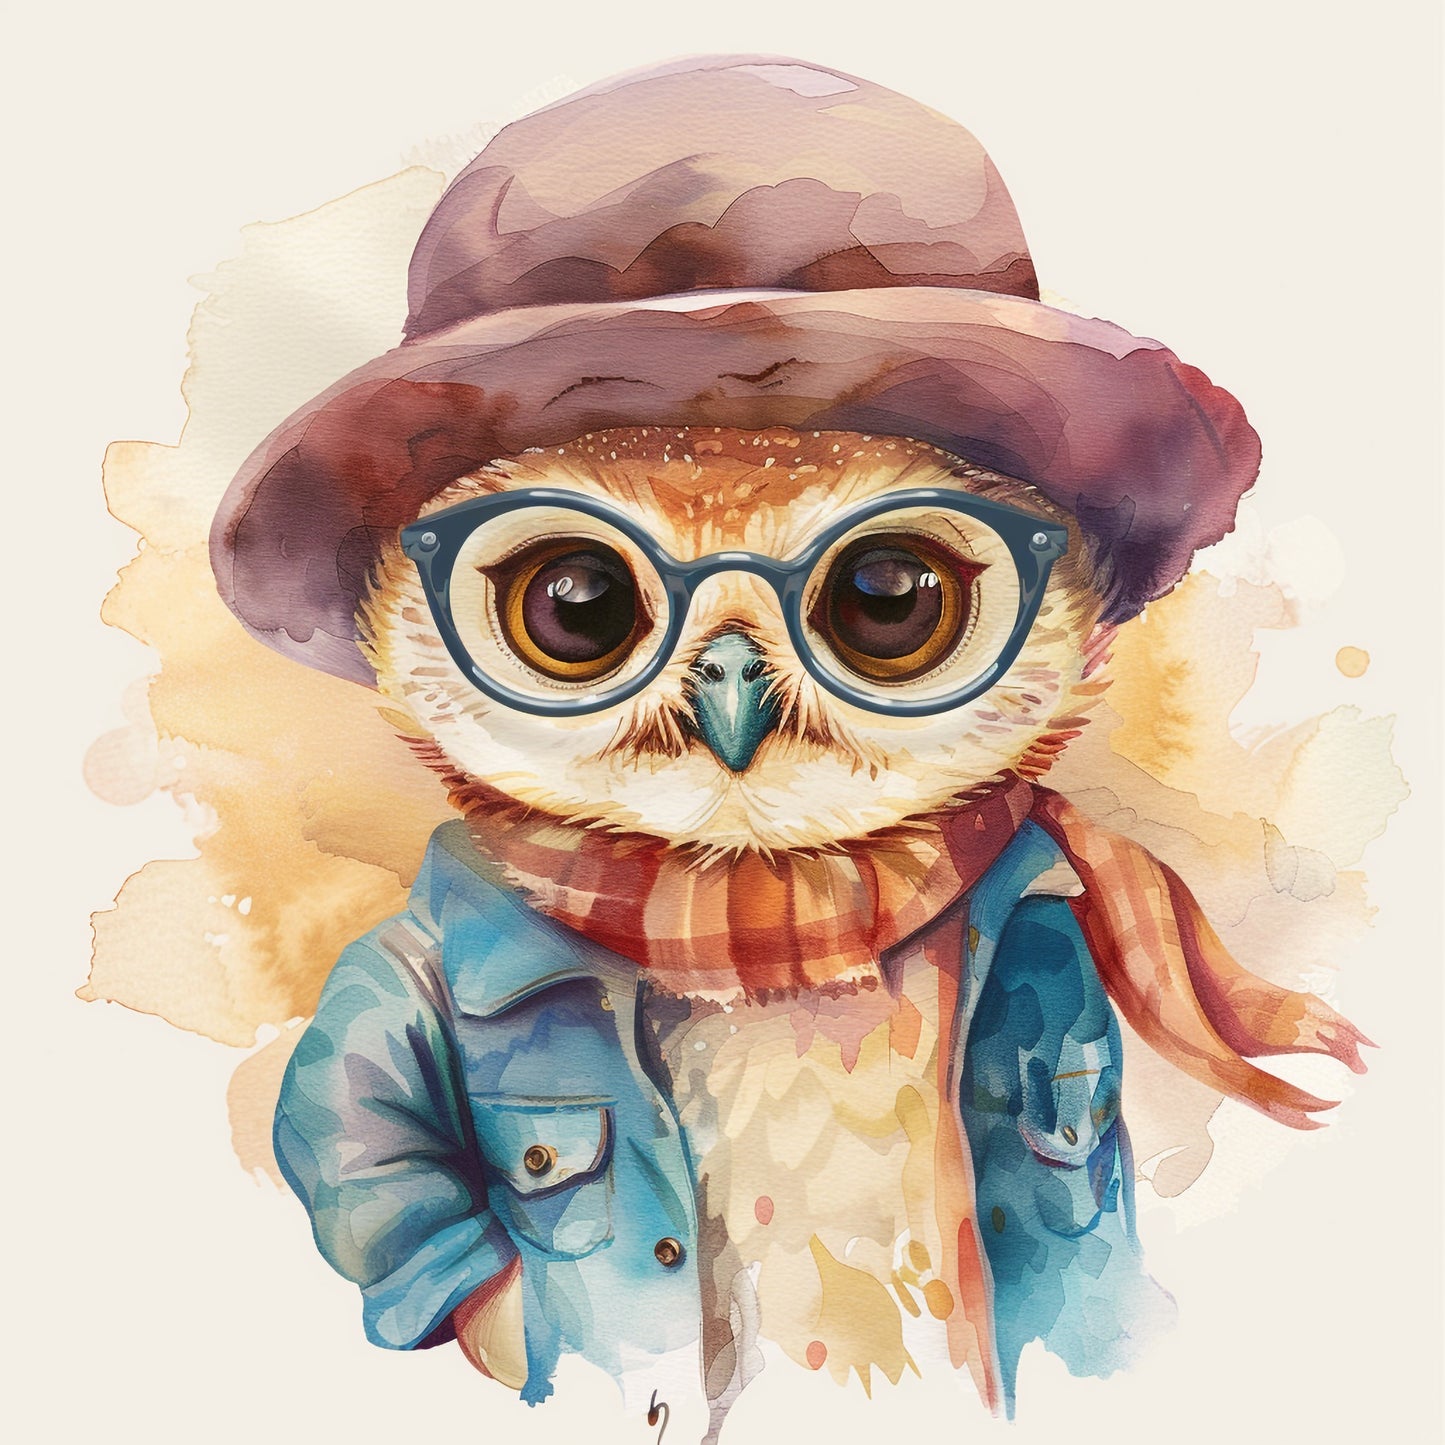 Retro Styled Baby Owl in Watercolor Illustration